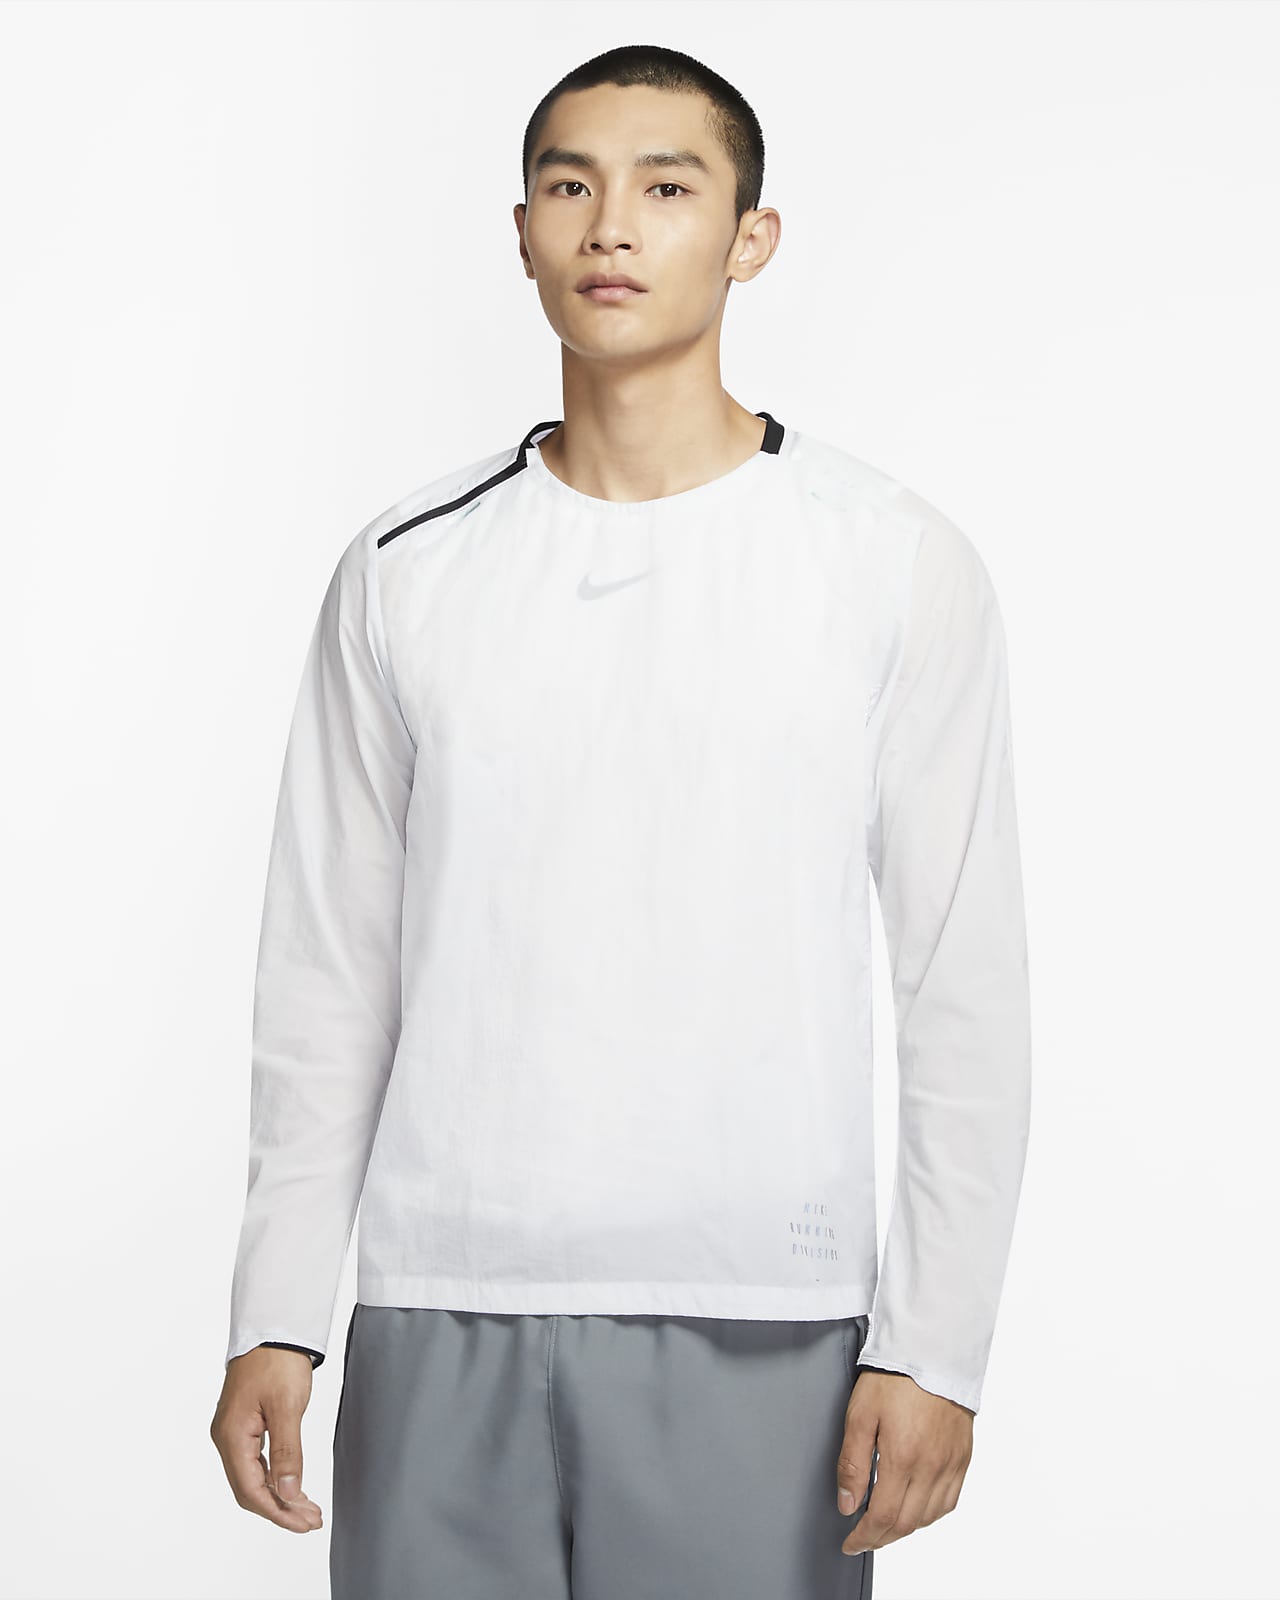 nike mid layer top mens